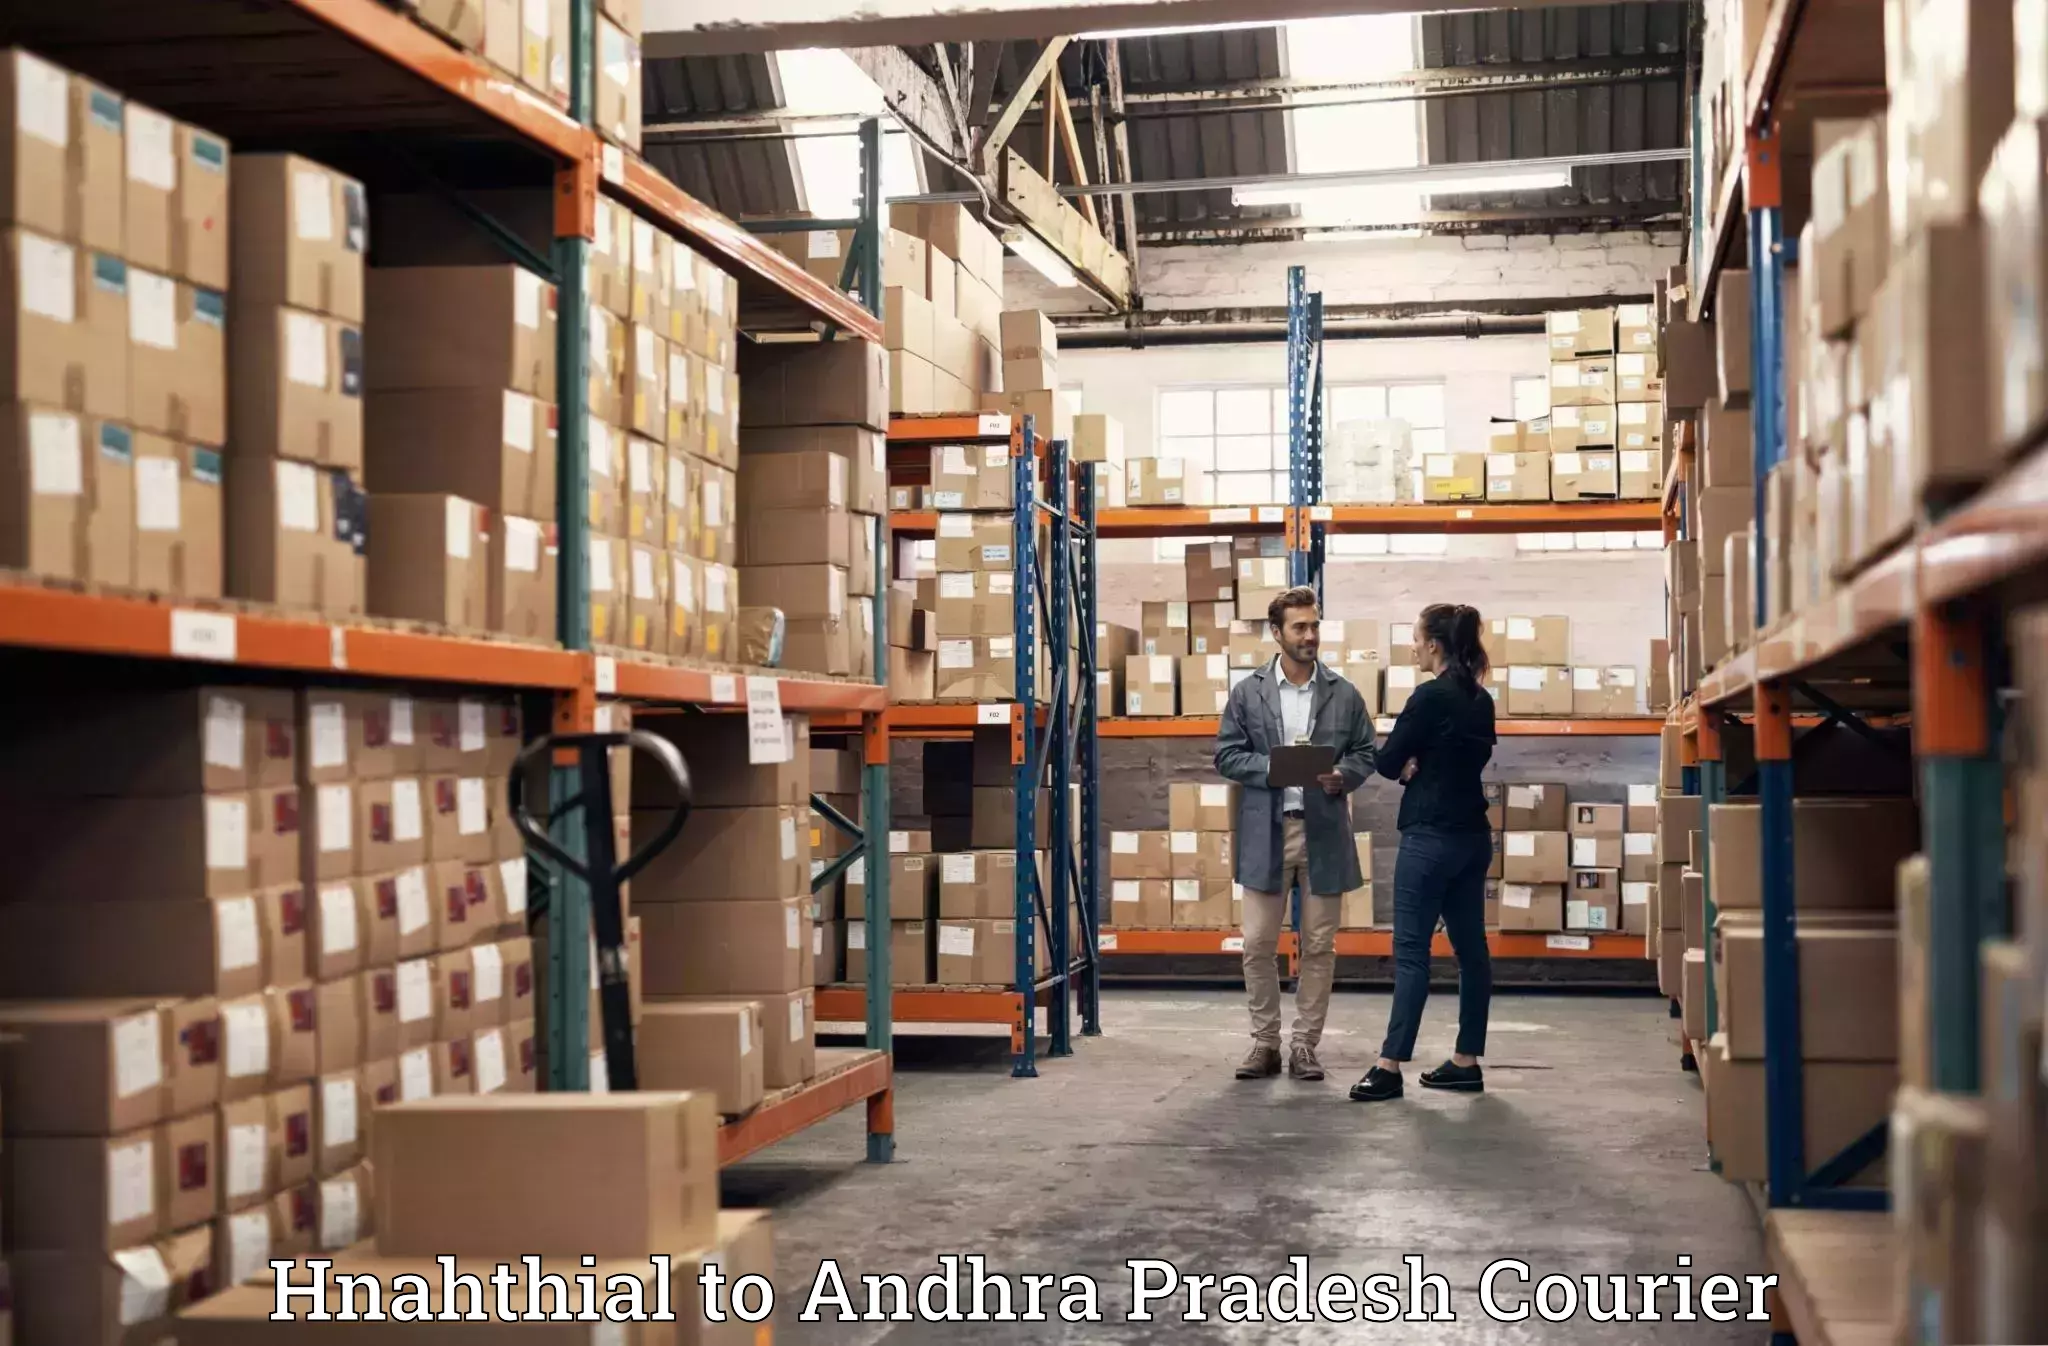 Quality moving services in Hnahthial to Chodavaram